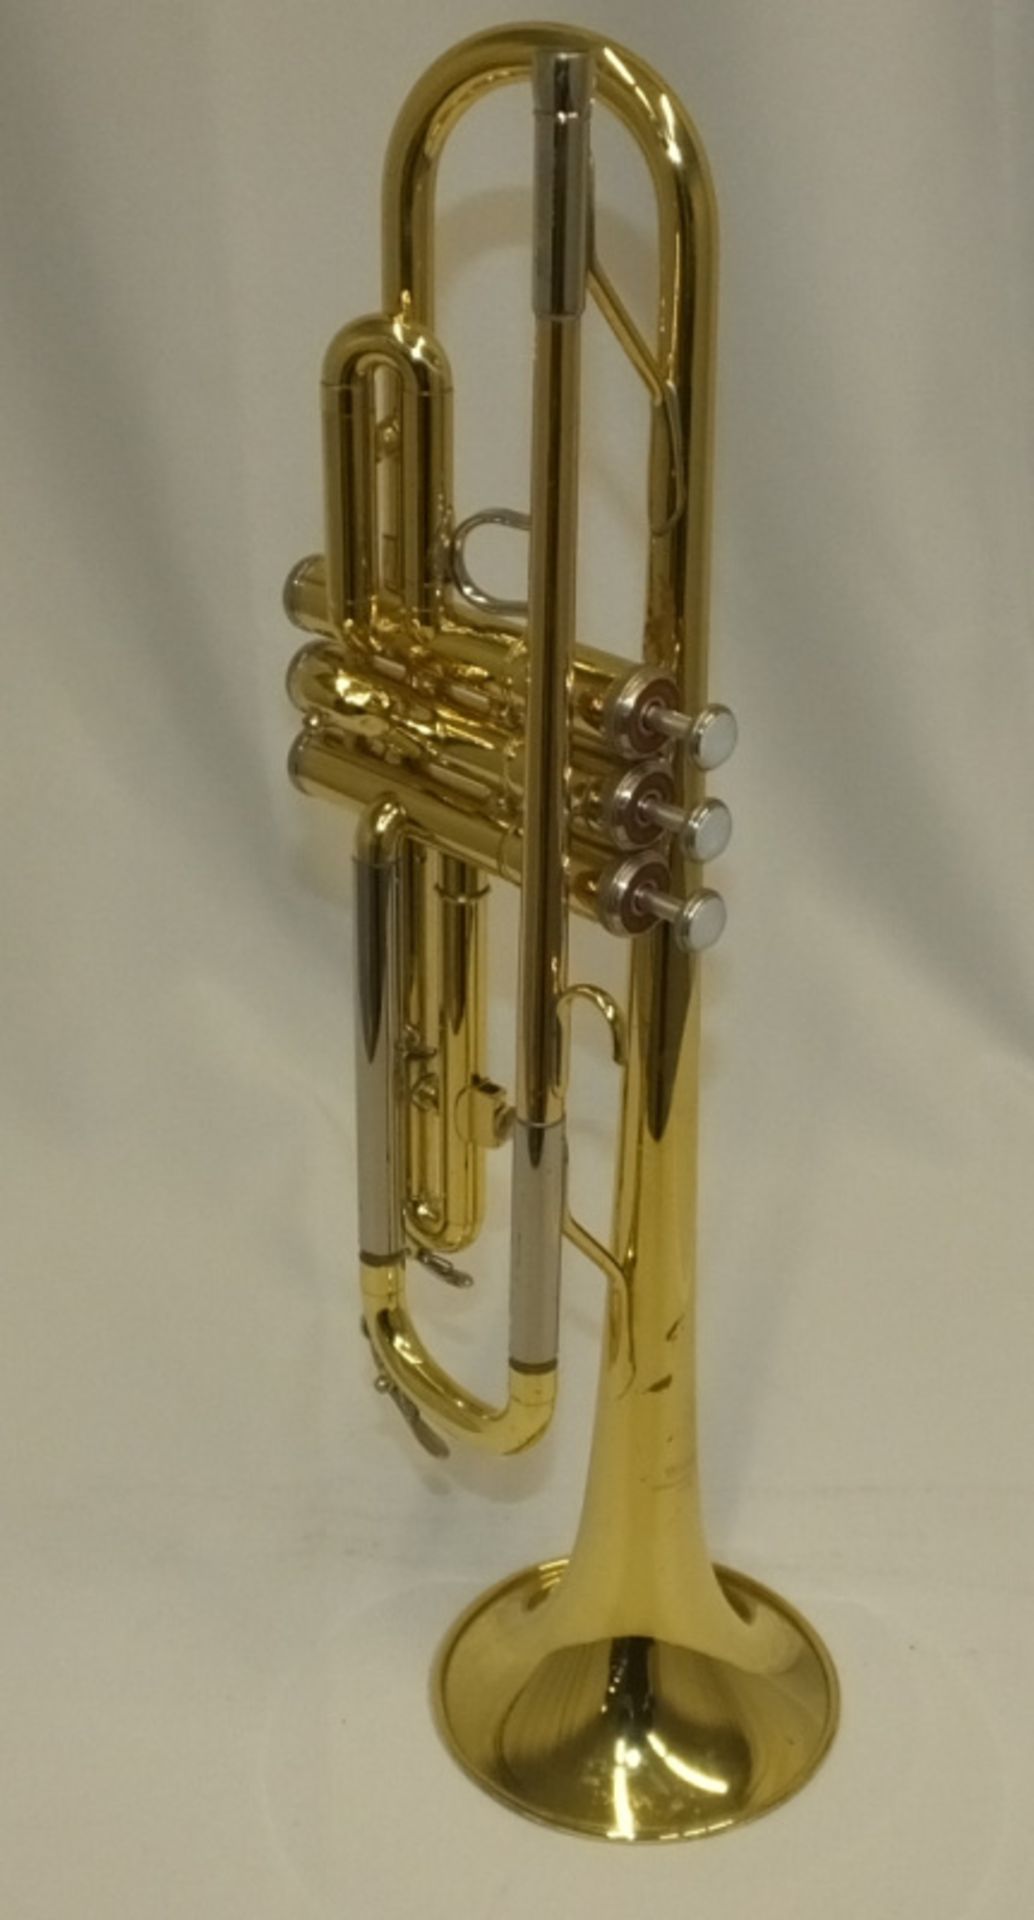 Yamaha YTR 2320E Trumpet in case - serial number 313785 - Please check photos carefully - Image 2 of 14